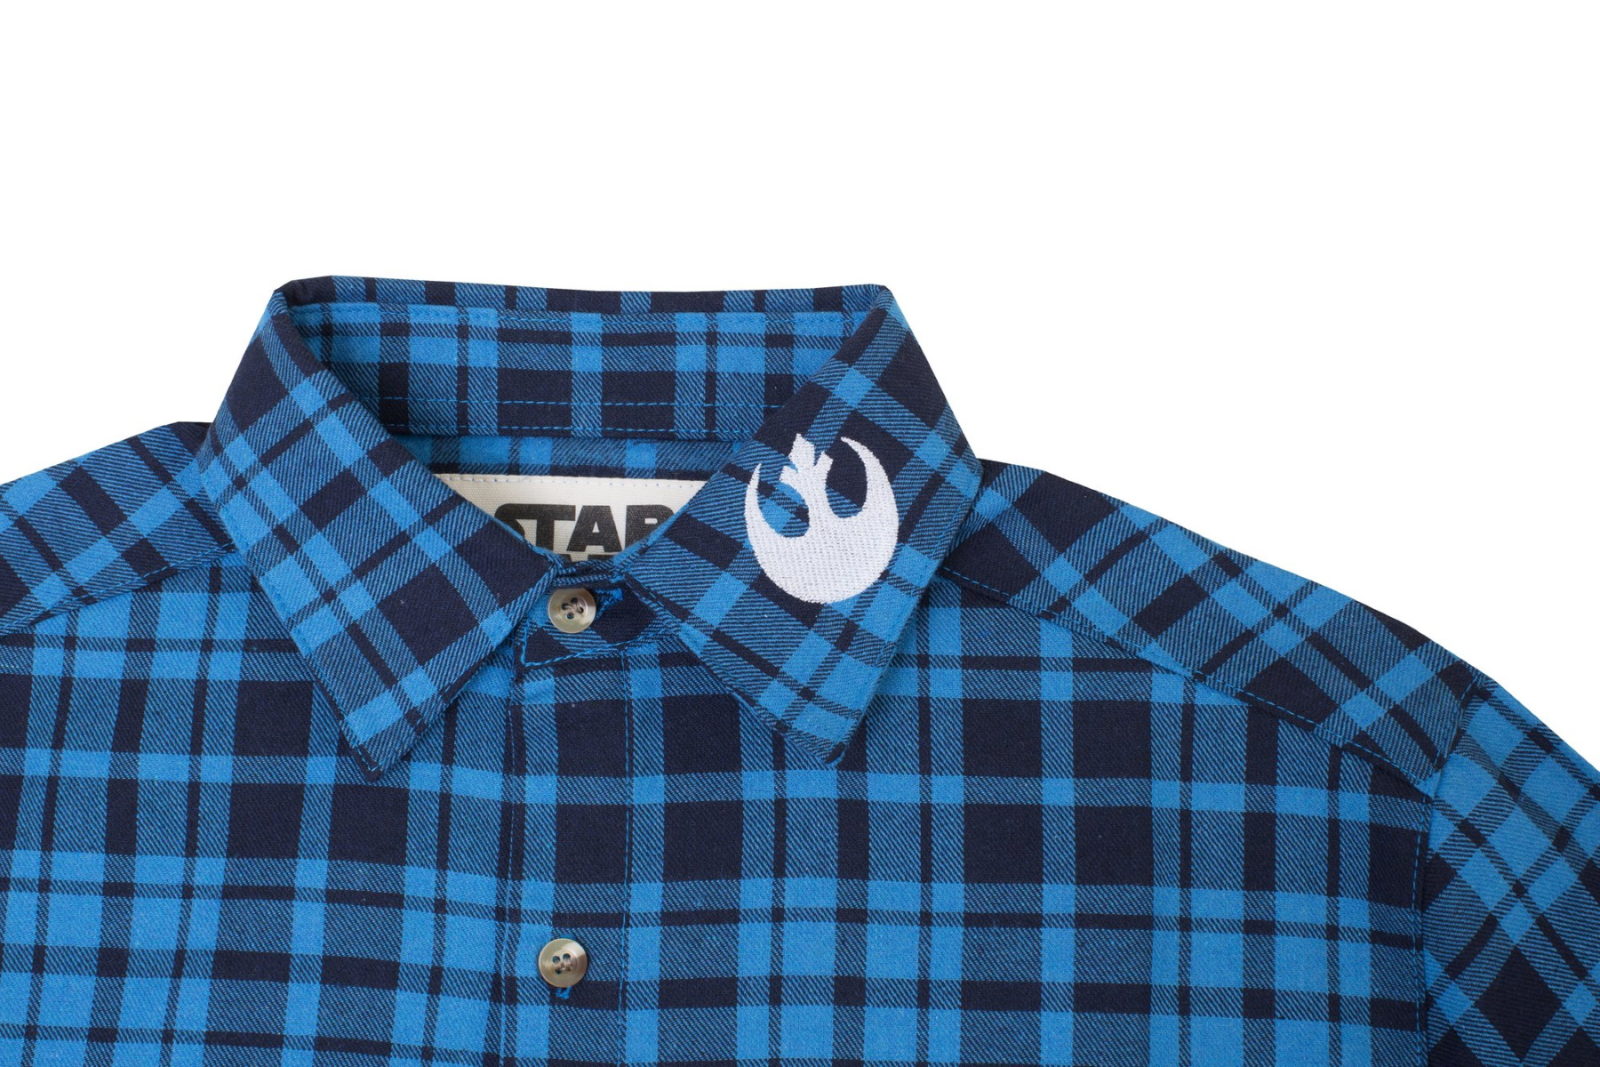 Cakeworthy x Star Wars May The Force Be With You Flannel Shirt